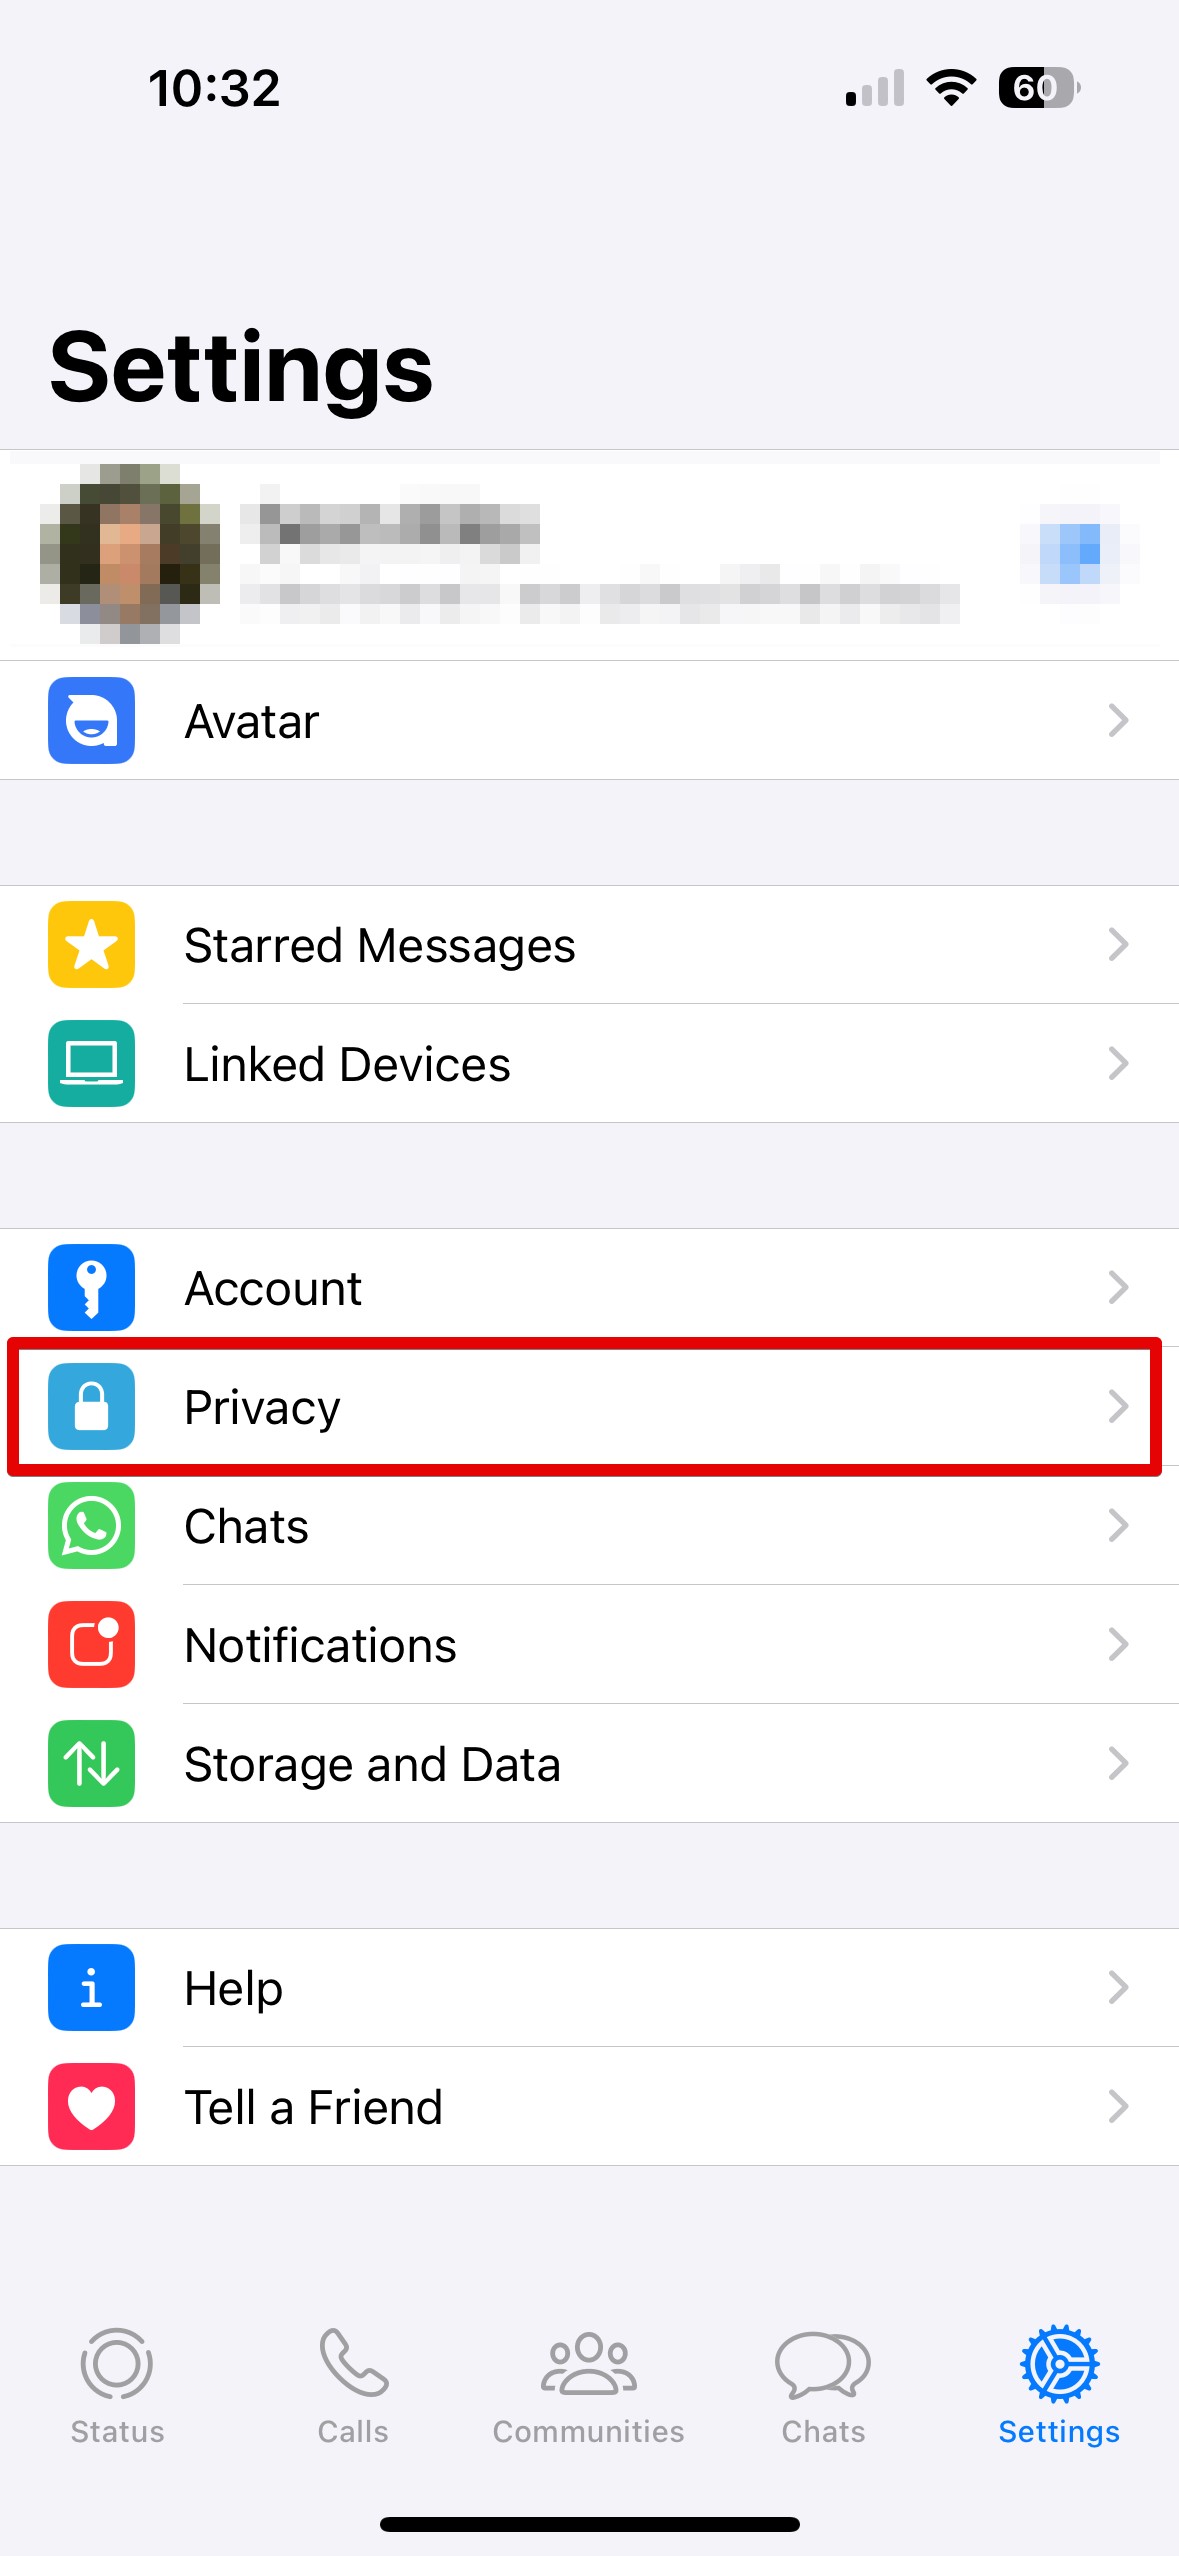 How to block WhatsApp spam steps. Settings > Privacy > Calls > Silence Unknown Callers